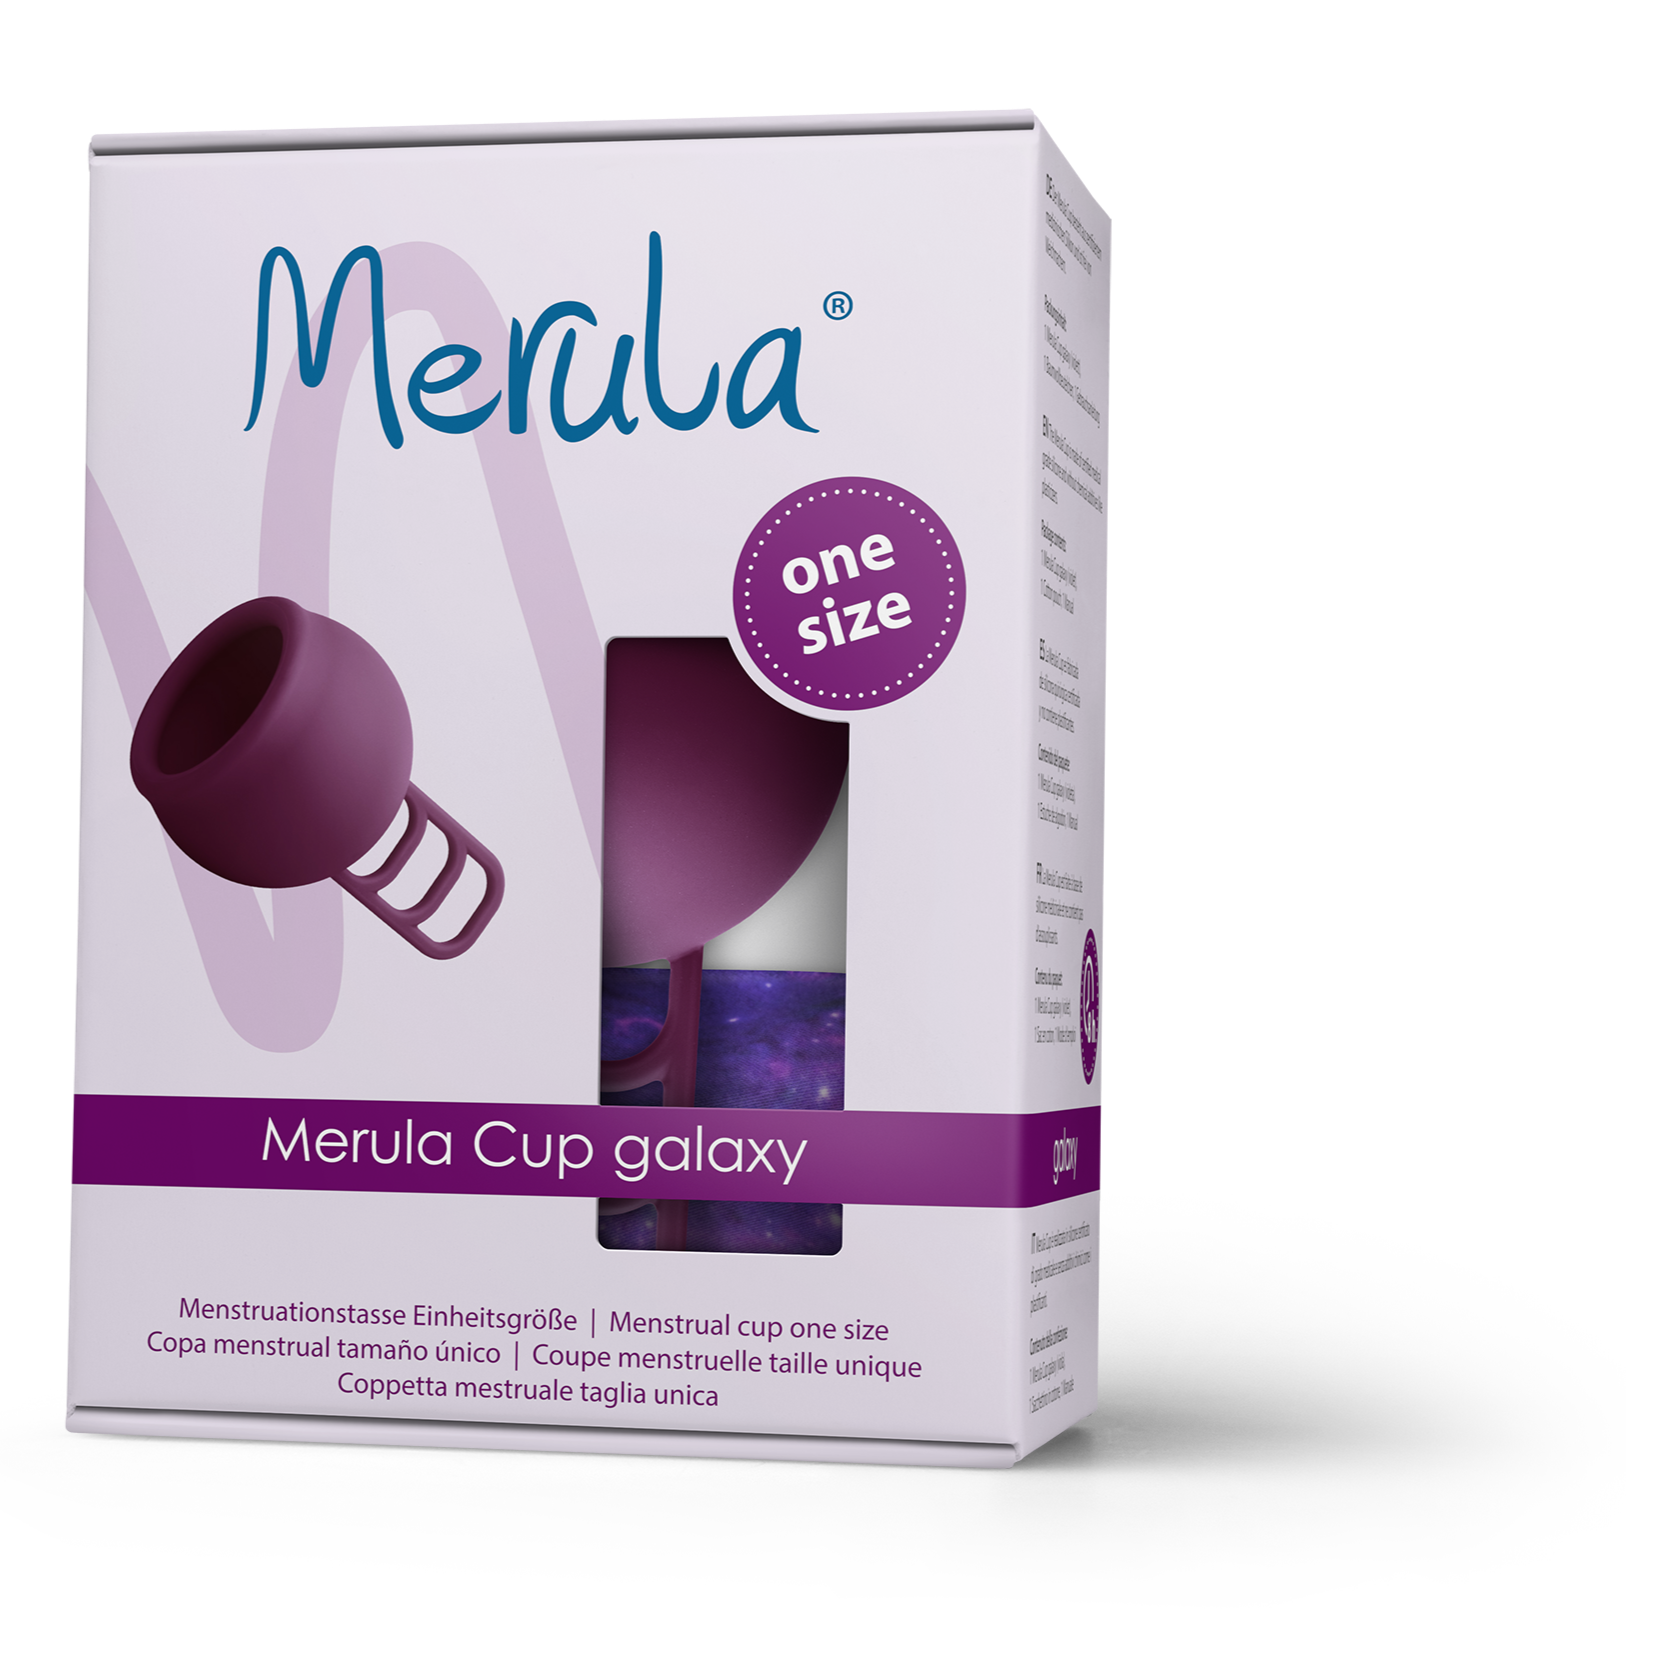 Merula OS best menstrual cup for low cervix and heavy flow 